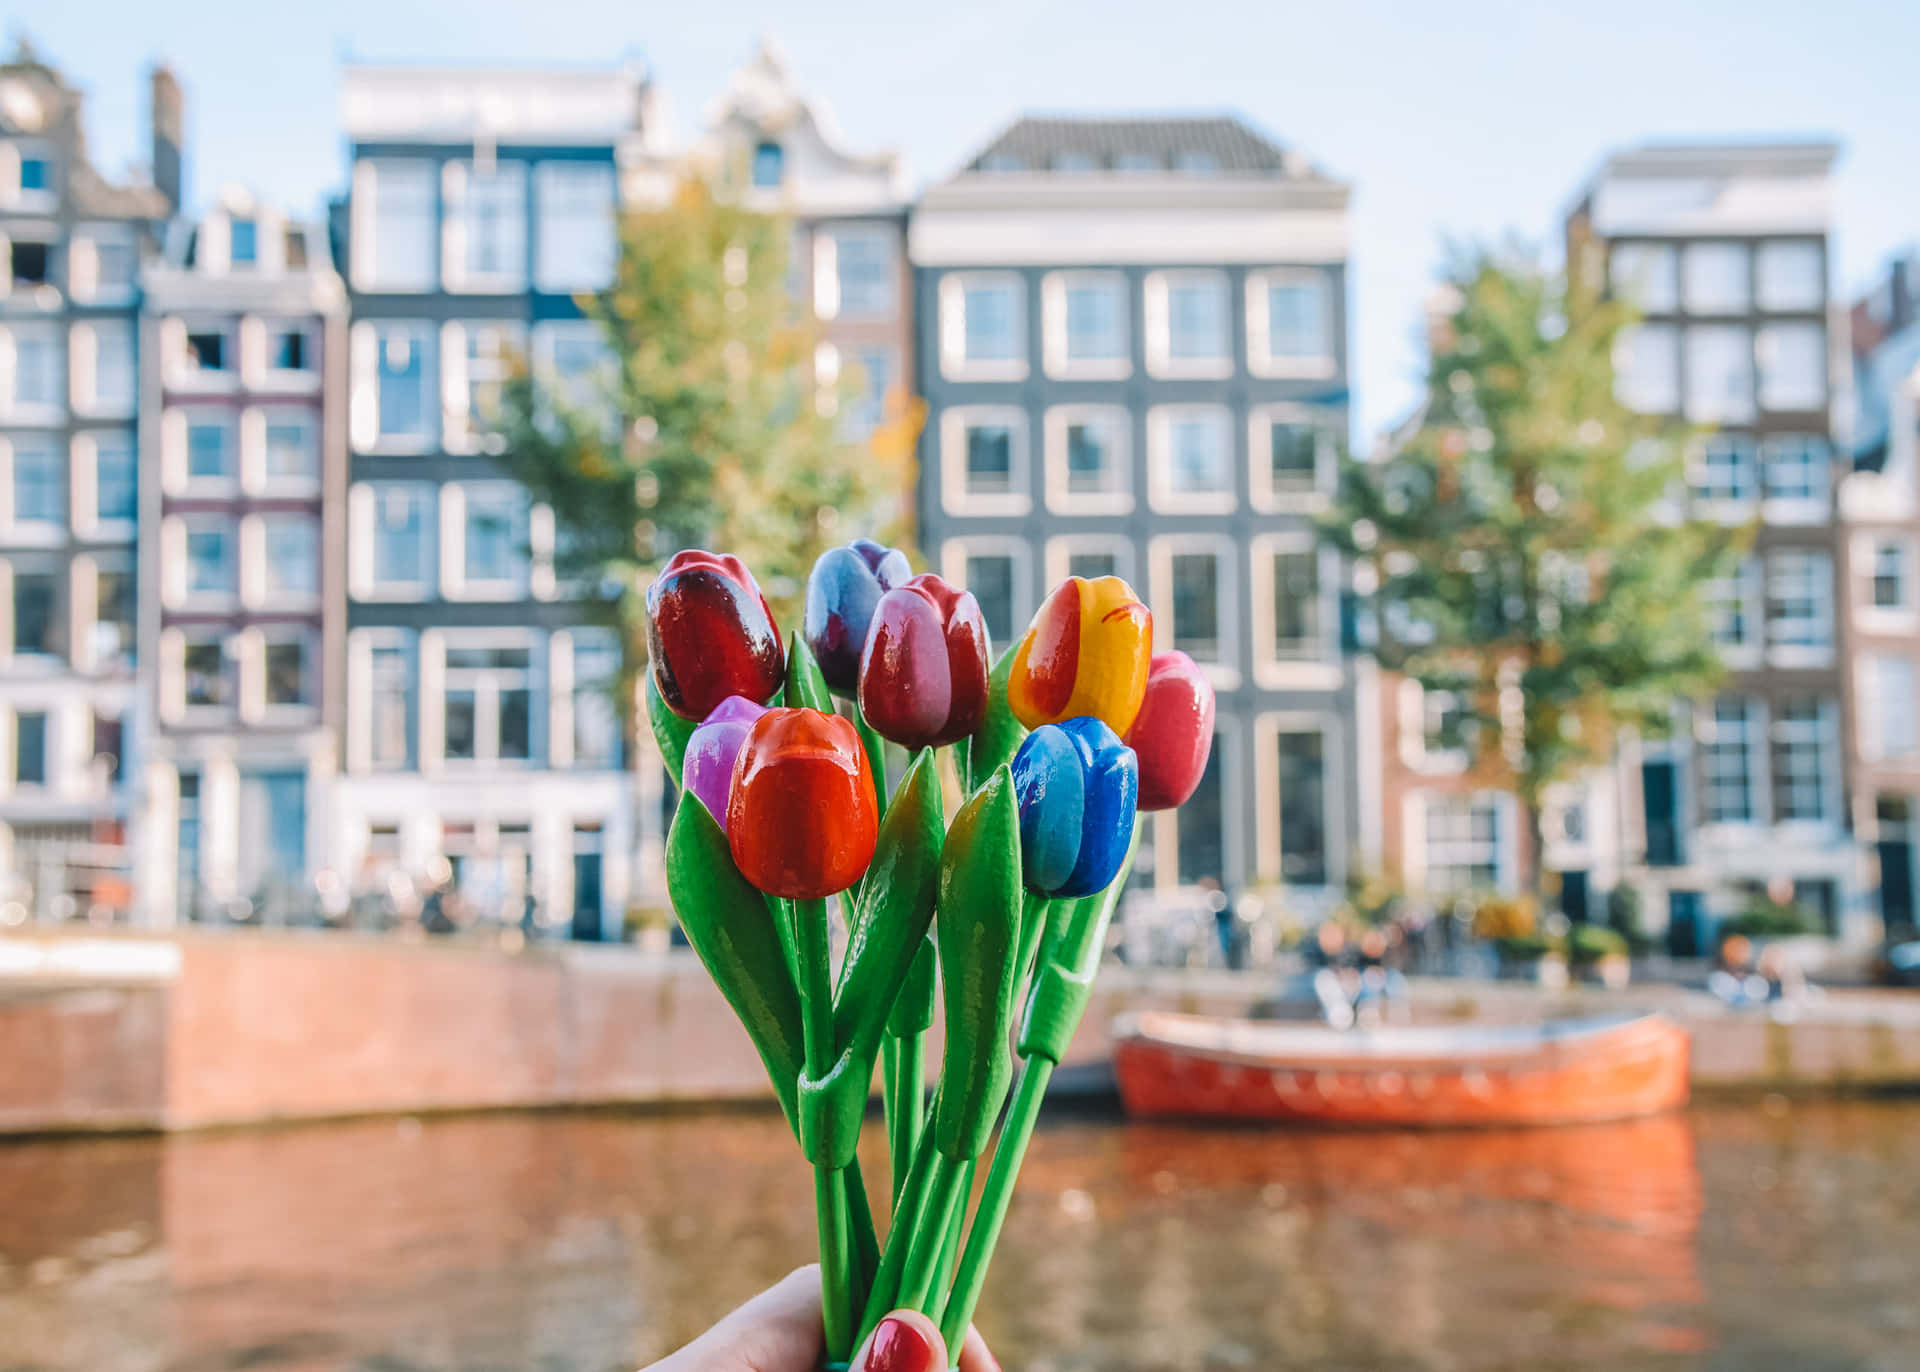 a person holding a bouquet of colorful tulips in front of a canal Wallpaper